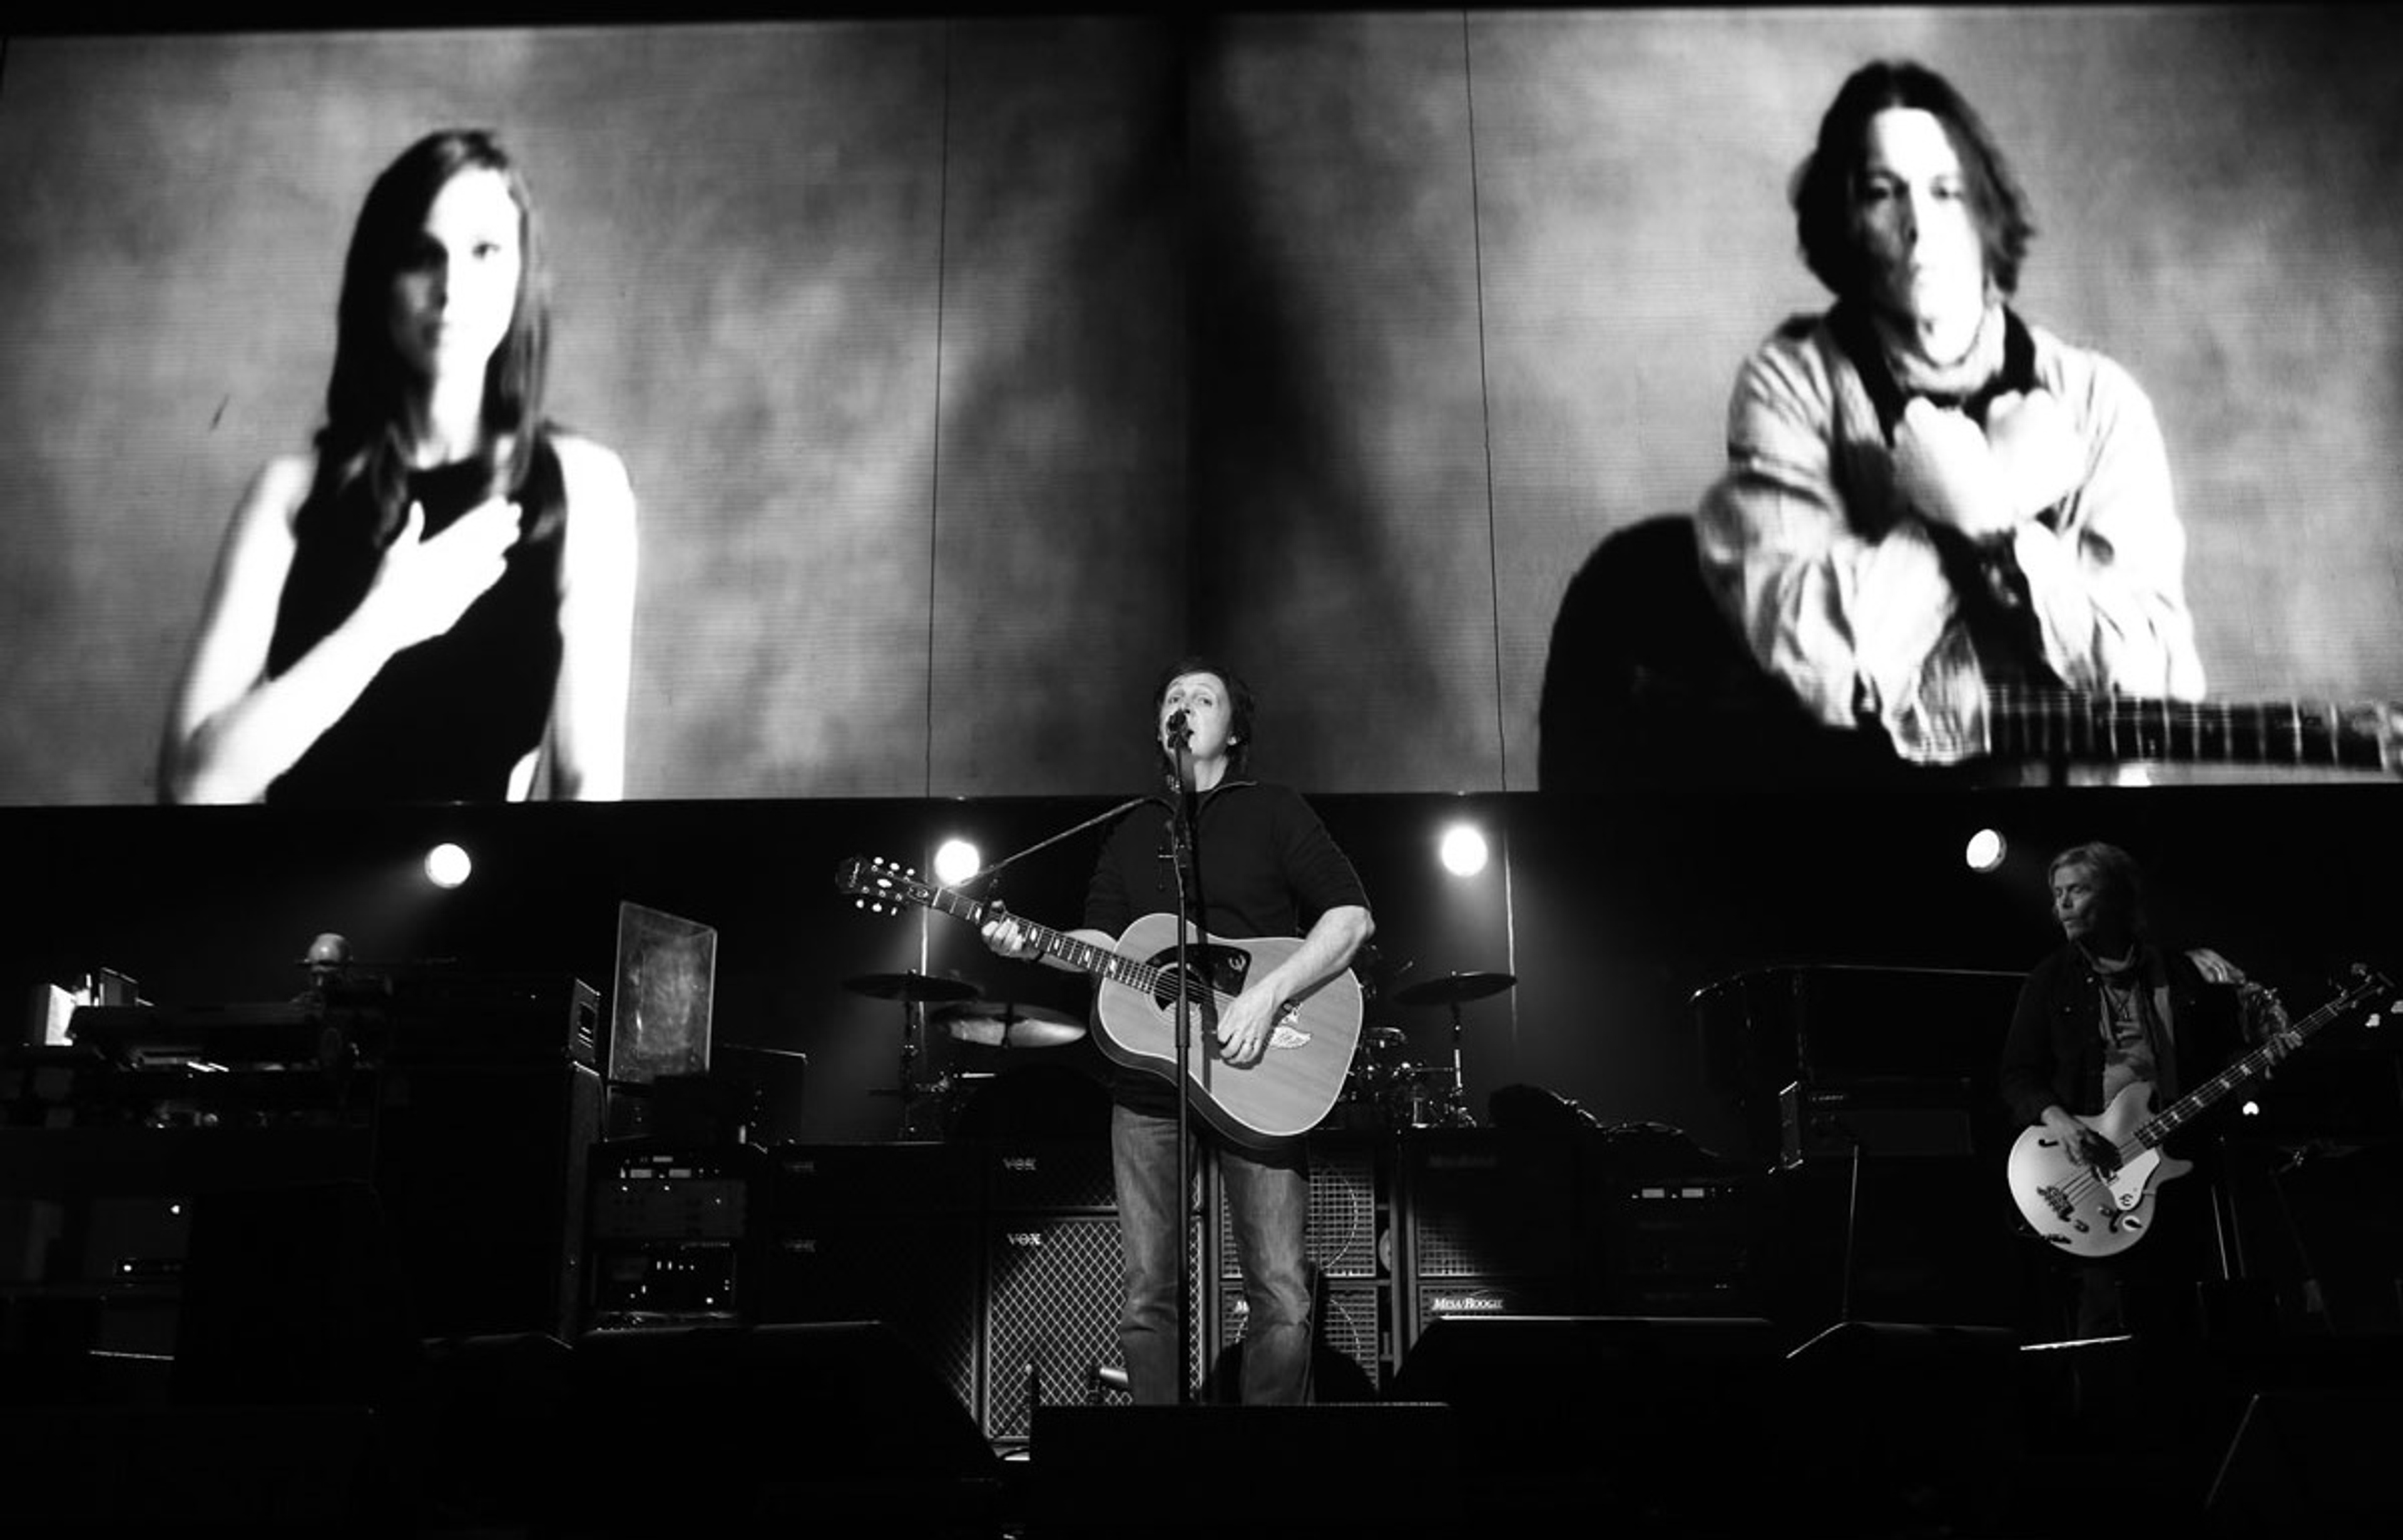 Wix, Paul and Brian at rehearsals with Natalie Portman and Johnny Depp on the screens, 12-12-12 Hurricane Sandy Benefit, Madison Square Garden, NYC, 11th December 2012